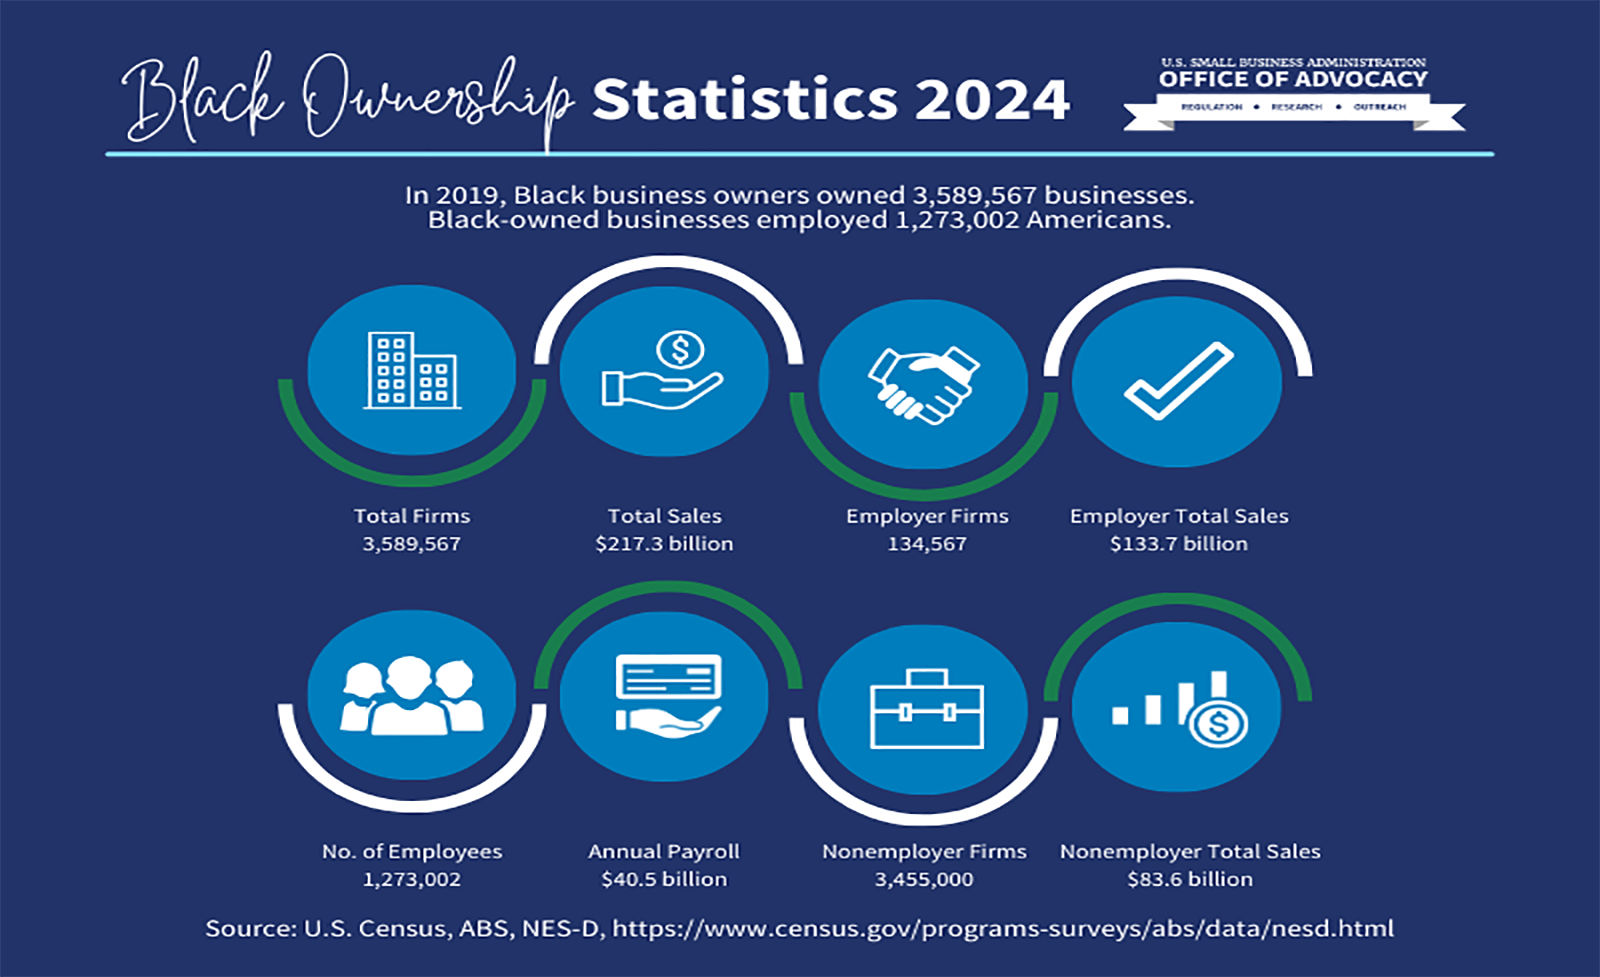 Black Ownership Statistics 2024 In 2019, Black business owners owned 3,589,567 businesses. Black-owned businesses employed 1,273,002 Americans. Total Firms 3,589,567 Total Sales 7.3 billion Employer Firms 134,567 Employer Total Sales 3.7 billion No. of Employees 1,273,002 Annual Payroll .5 billion Nonemployer Firms 3,455,000 Nonemployer Total Sales .6 billion Source: U.S. Census, ABS, NES-D, https://www.census.gov/programs-surveys/abs/data/nesd.html